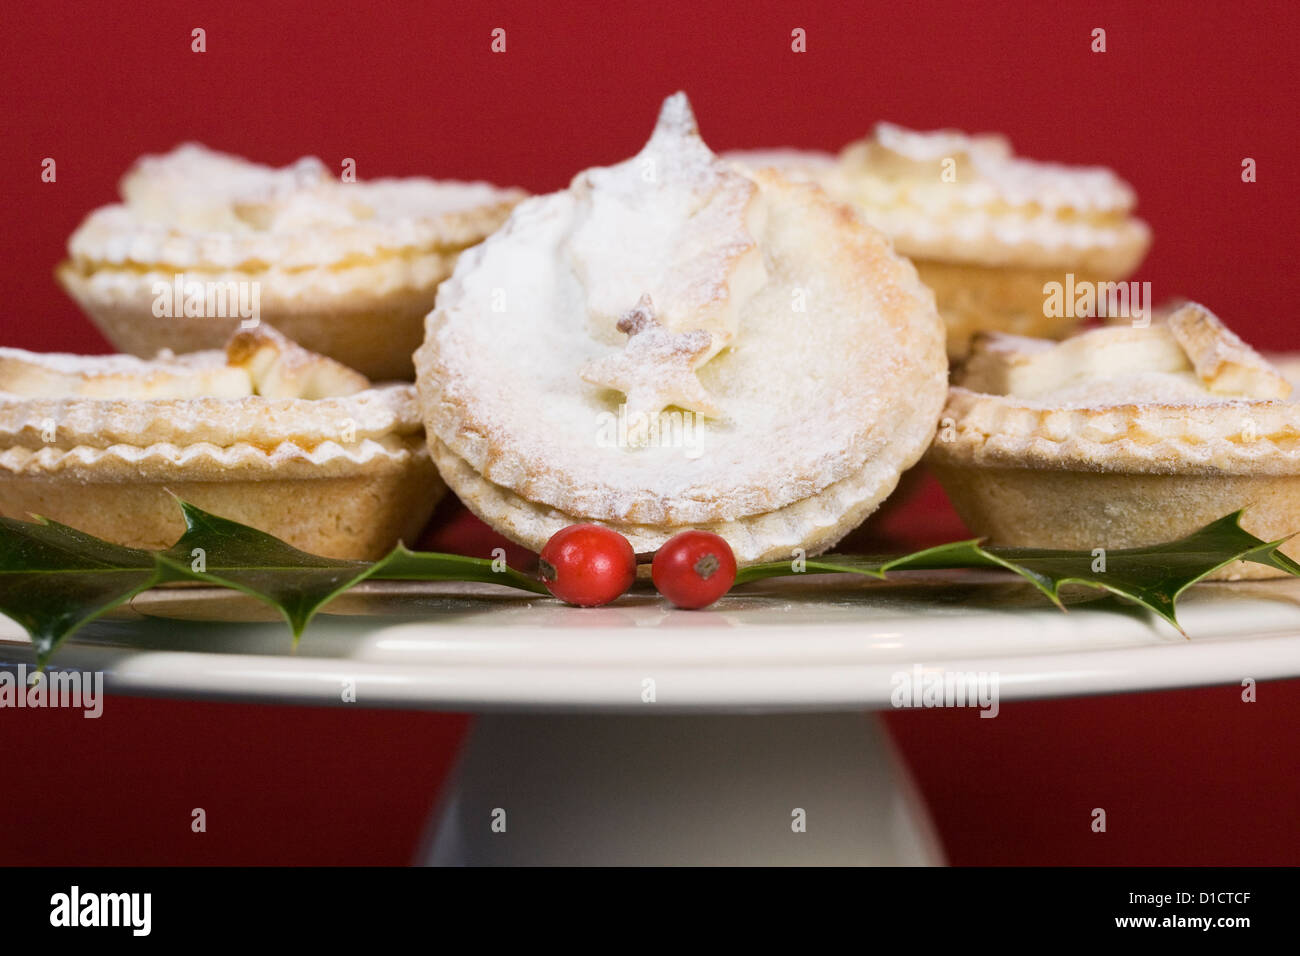 Freshly made mince pies on a cake stand against a red background. Stock Photo